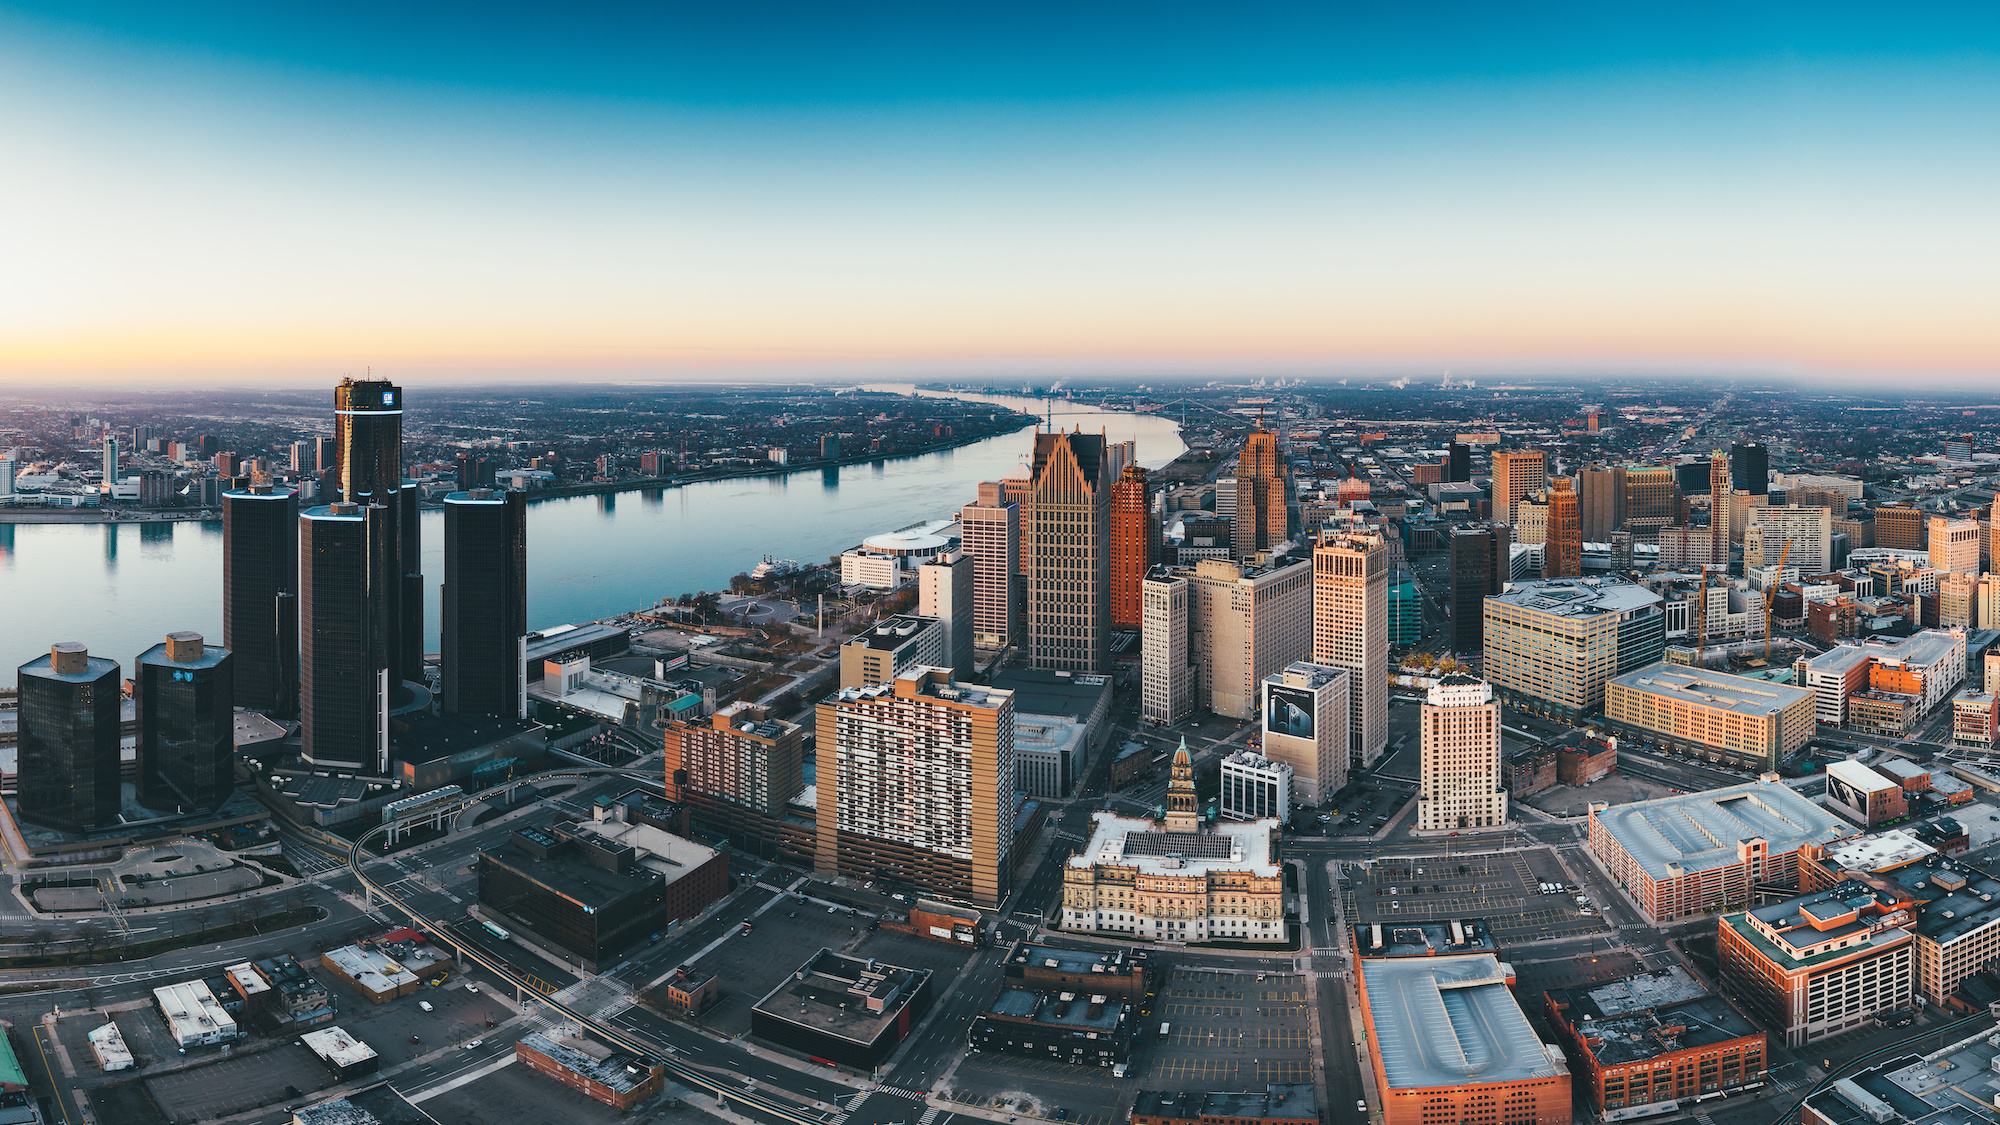 Discover Detroit: 11 Fun Facts That Define the Motor City - Facts.net